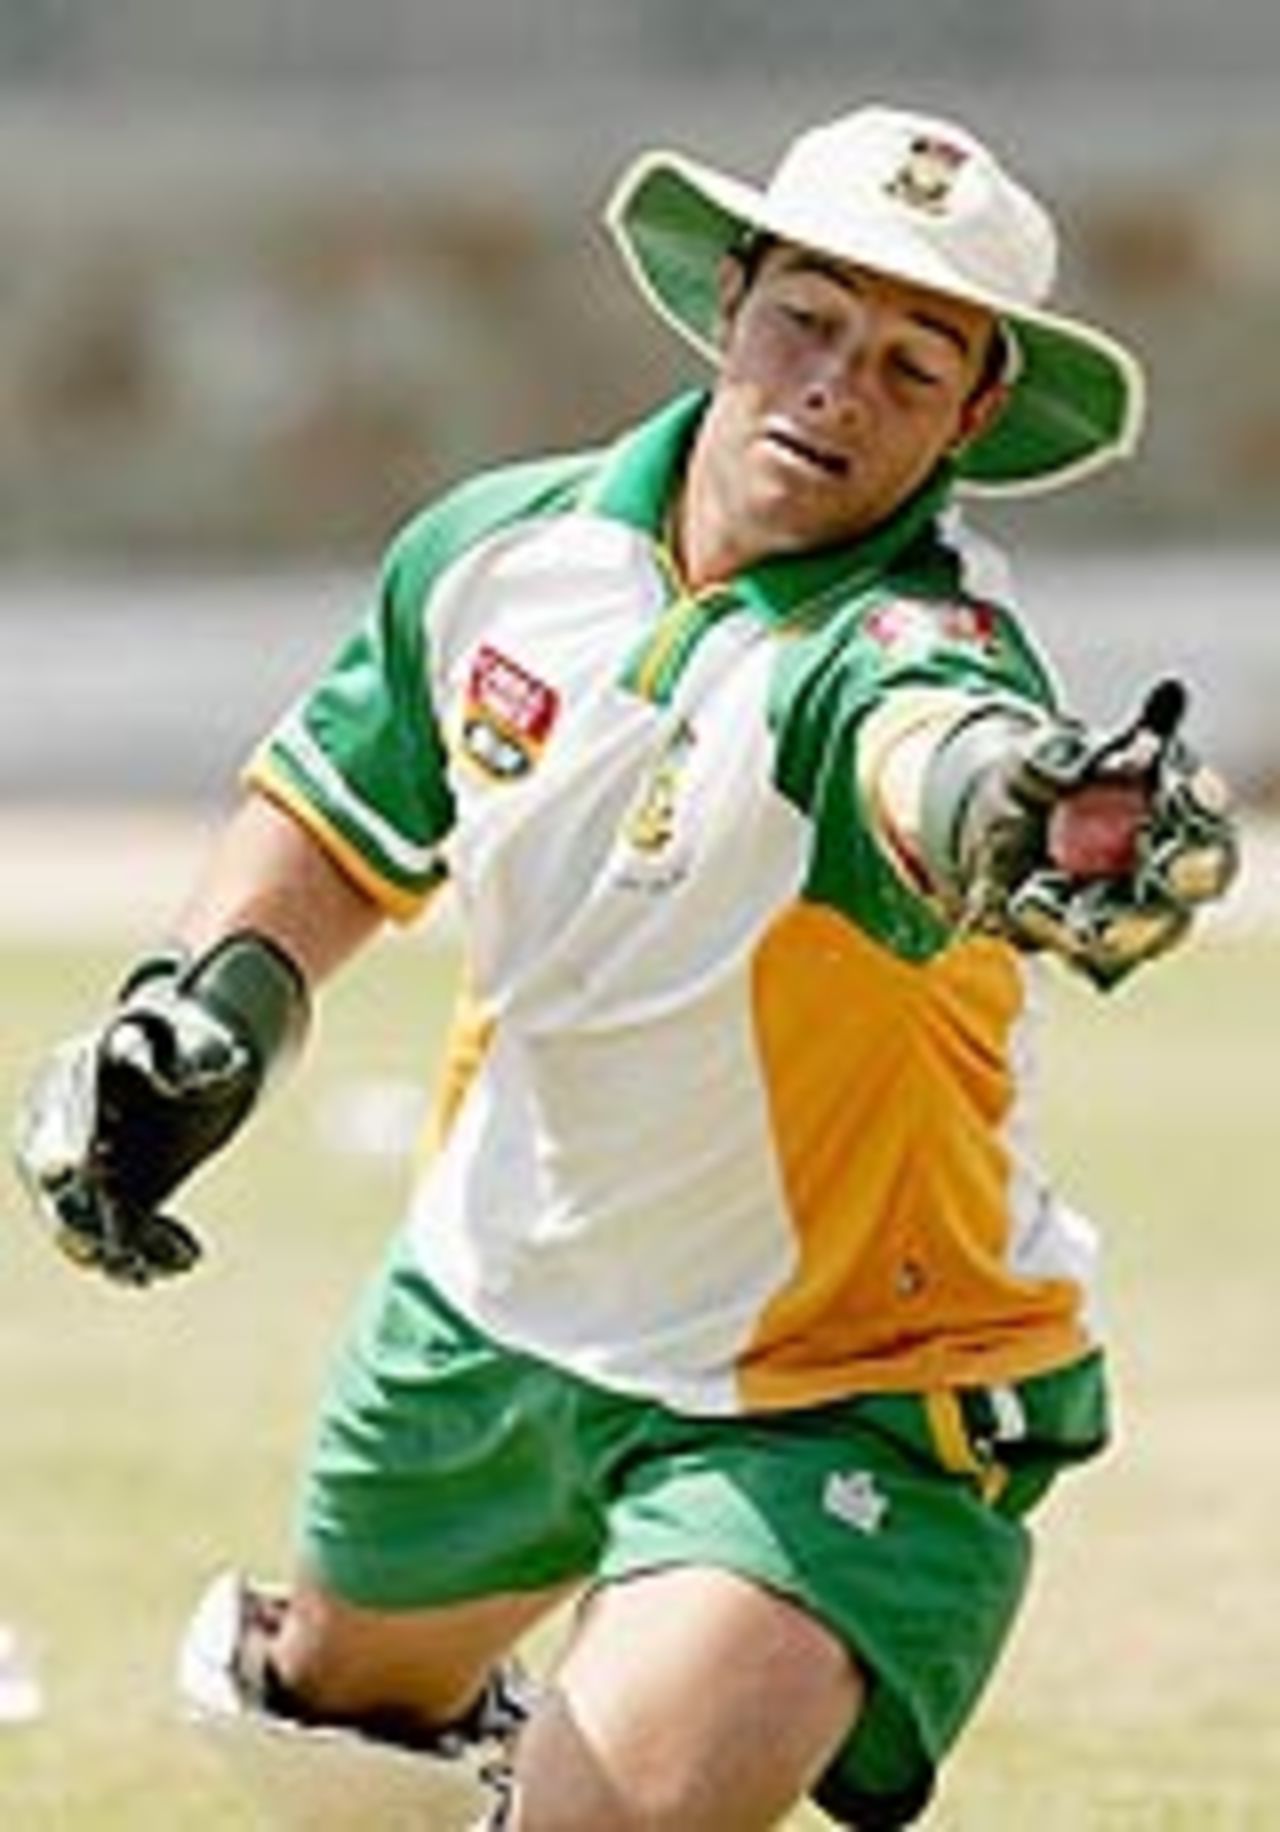 Mark Boucher puts in some catching practise ahead of the first Test on March 31 in Guyana, March 29, 2005